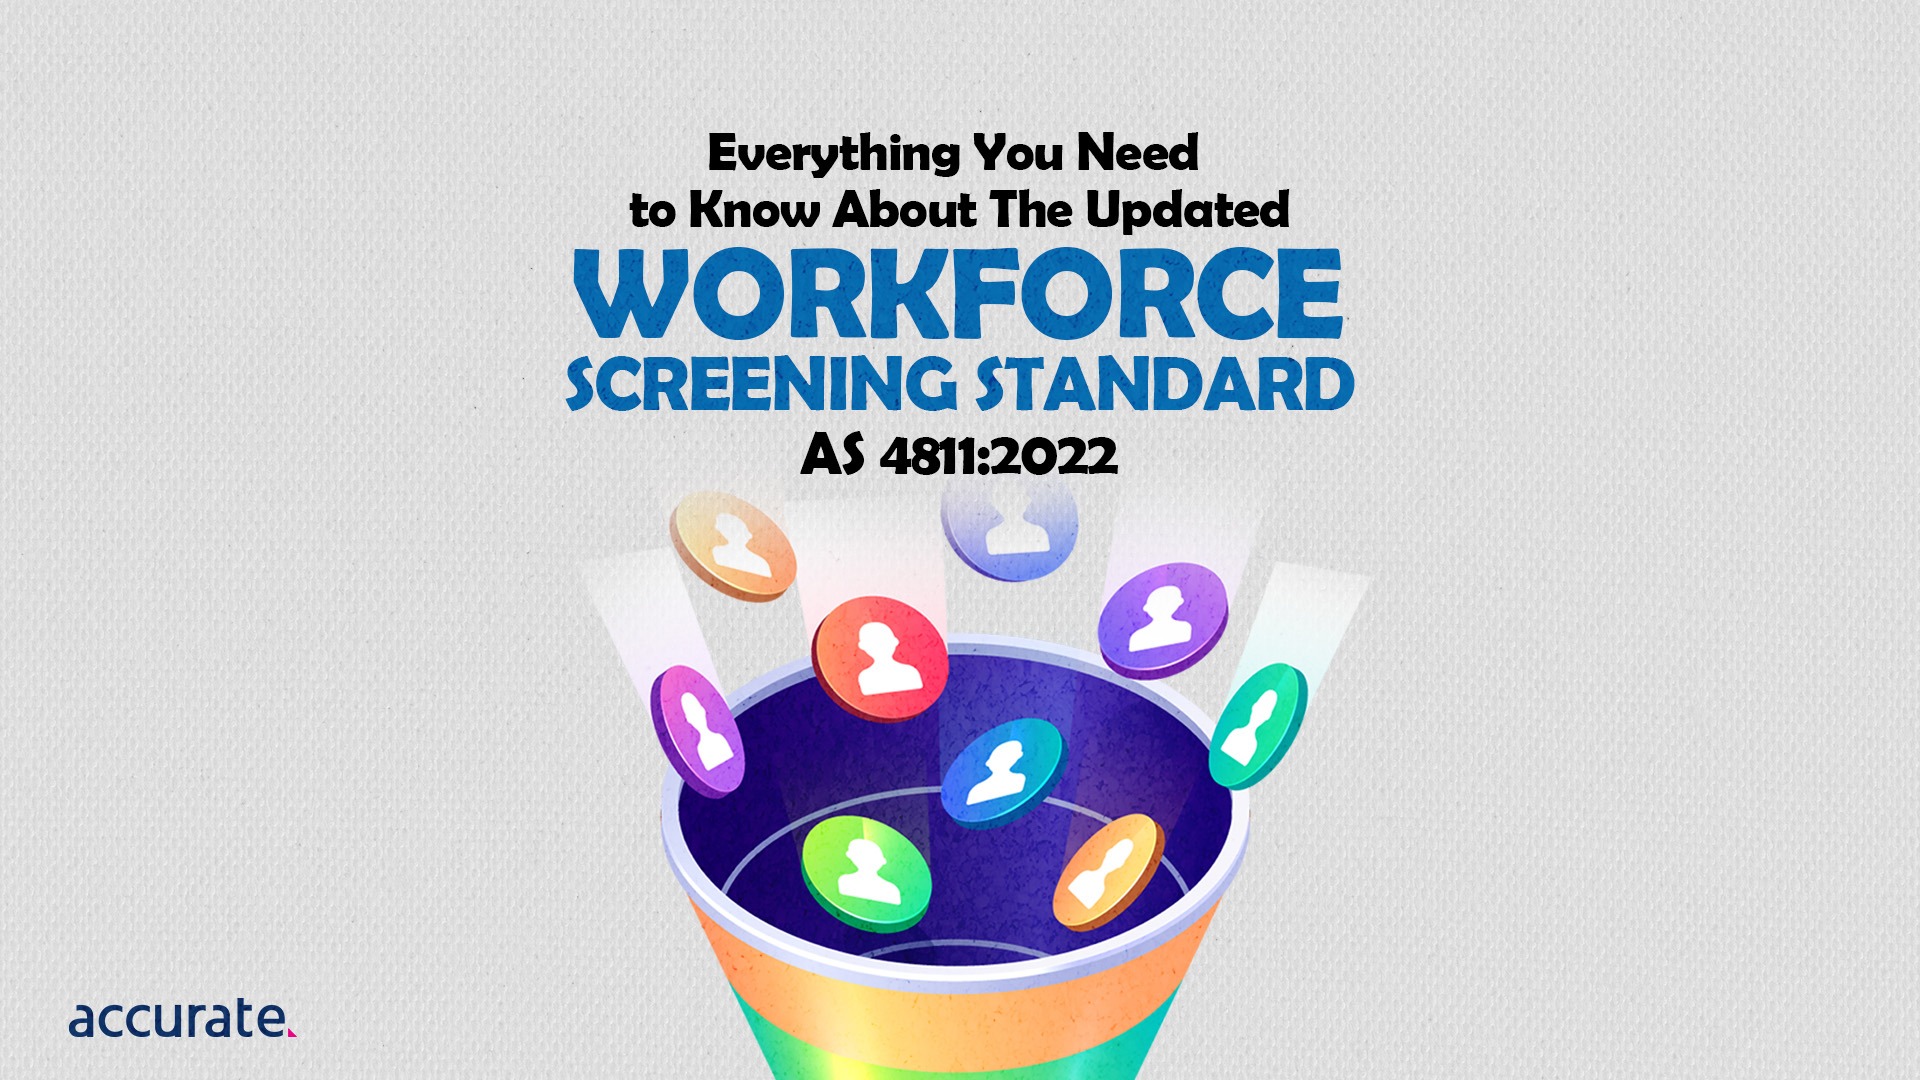 Featured Image - Everything You Need To Know About The Updated Workforce Screening Standard AS 4811:2022